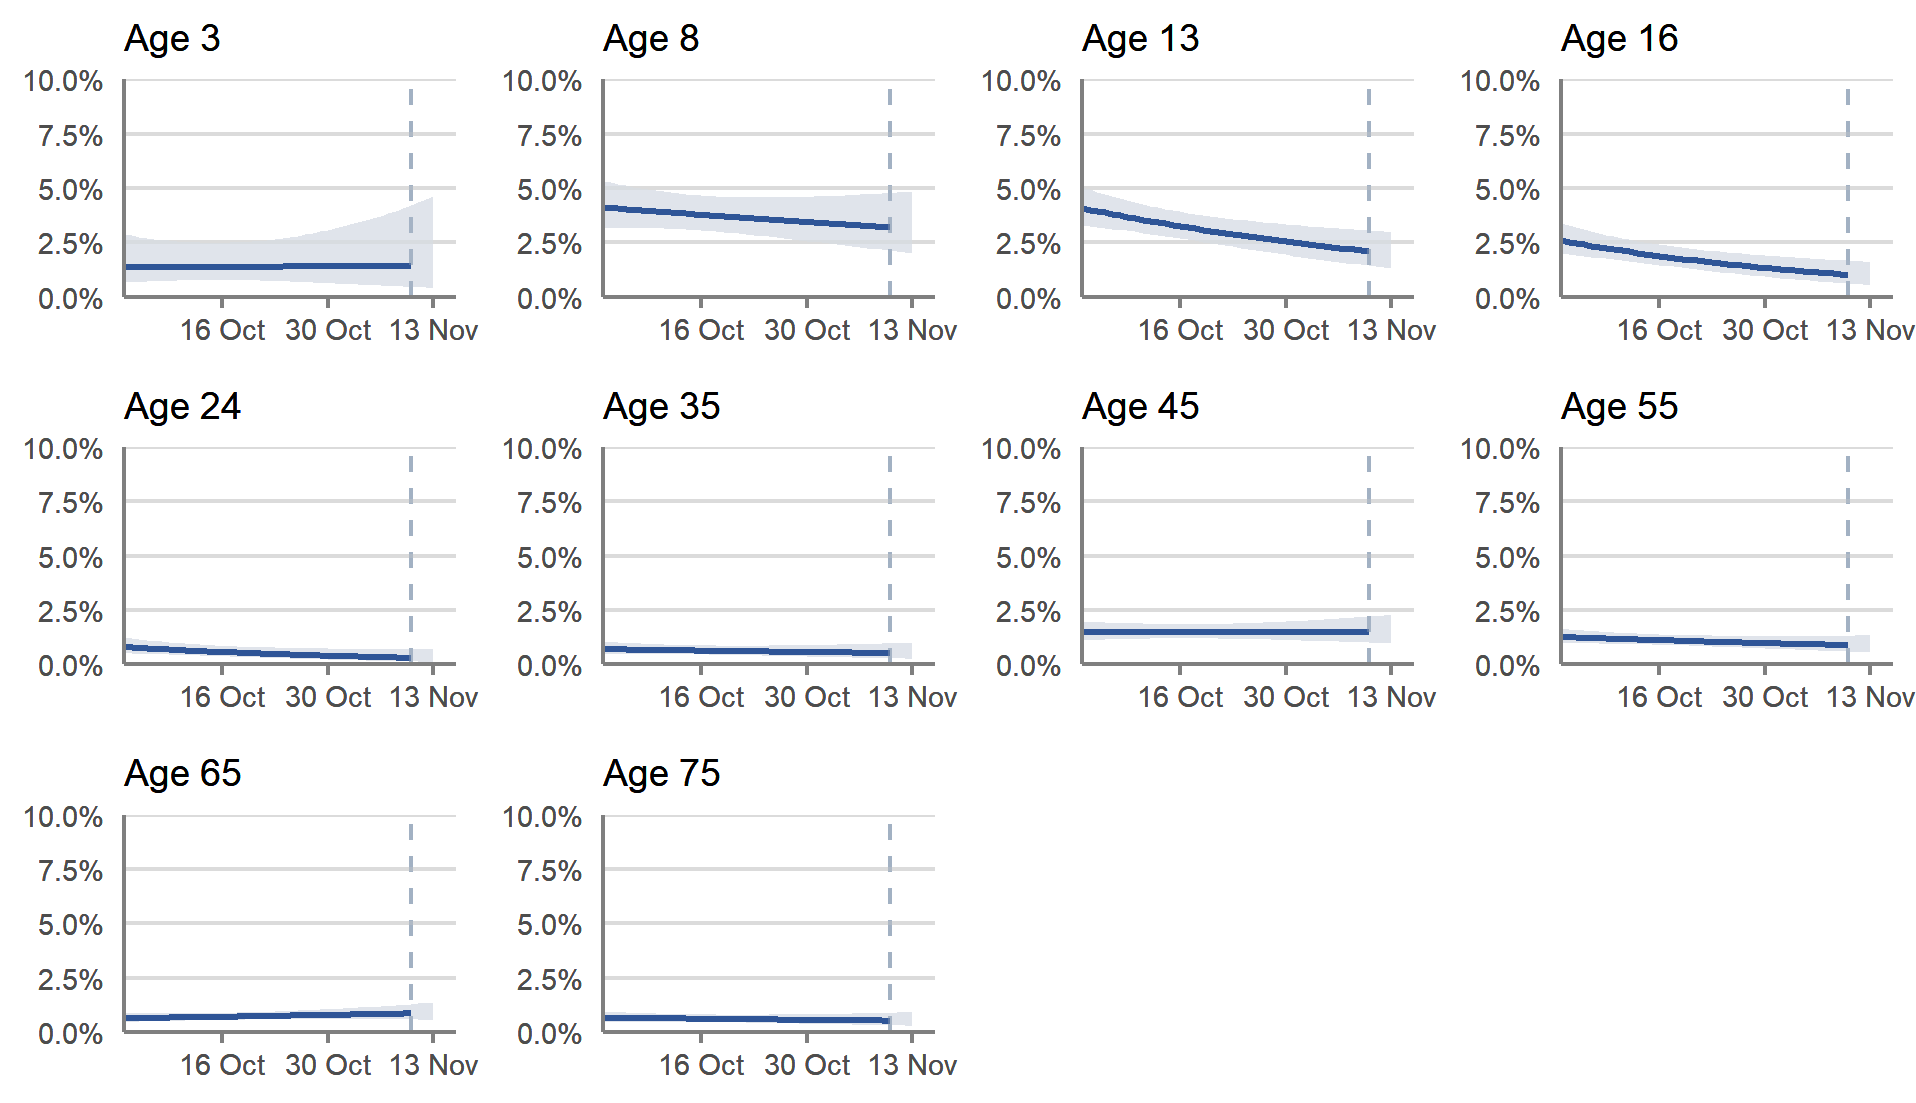 This chart shows the percentage of people testing positive for COVID-19 by reference age, between 3 October and 13 November 2021. These estimates are based on modelled daily estimates of the percentage of the private residential population testing positive for COVID-19 in Scotland by single year of age.  In recent weeks, there were signs that the percentage of people testing positive decreased for those of secondary school age and young adults but the trend was uncertain for all other ages.